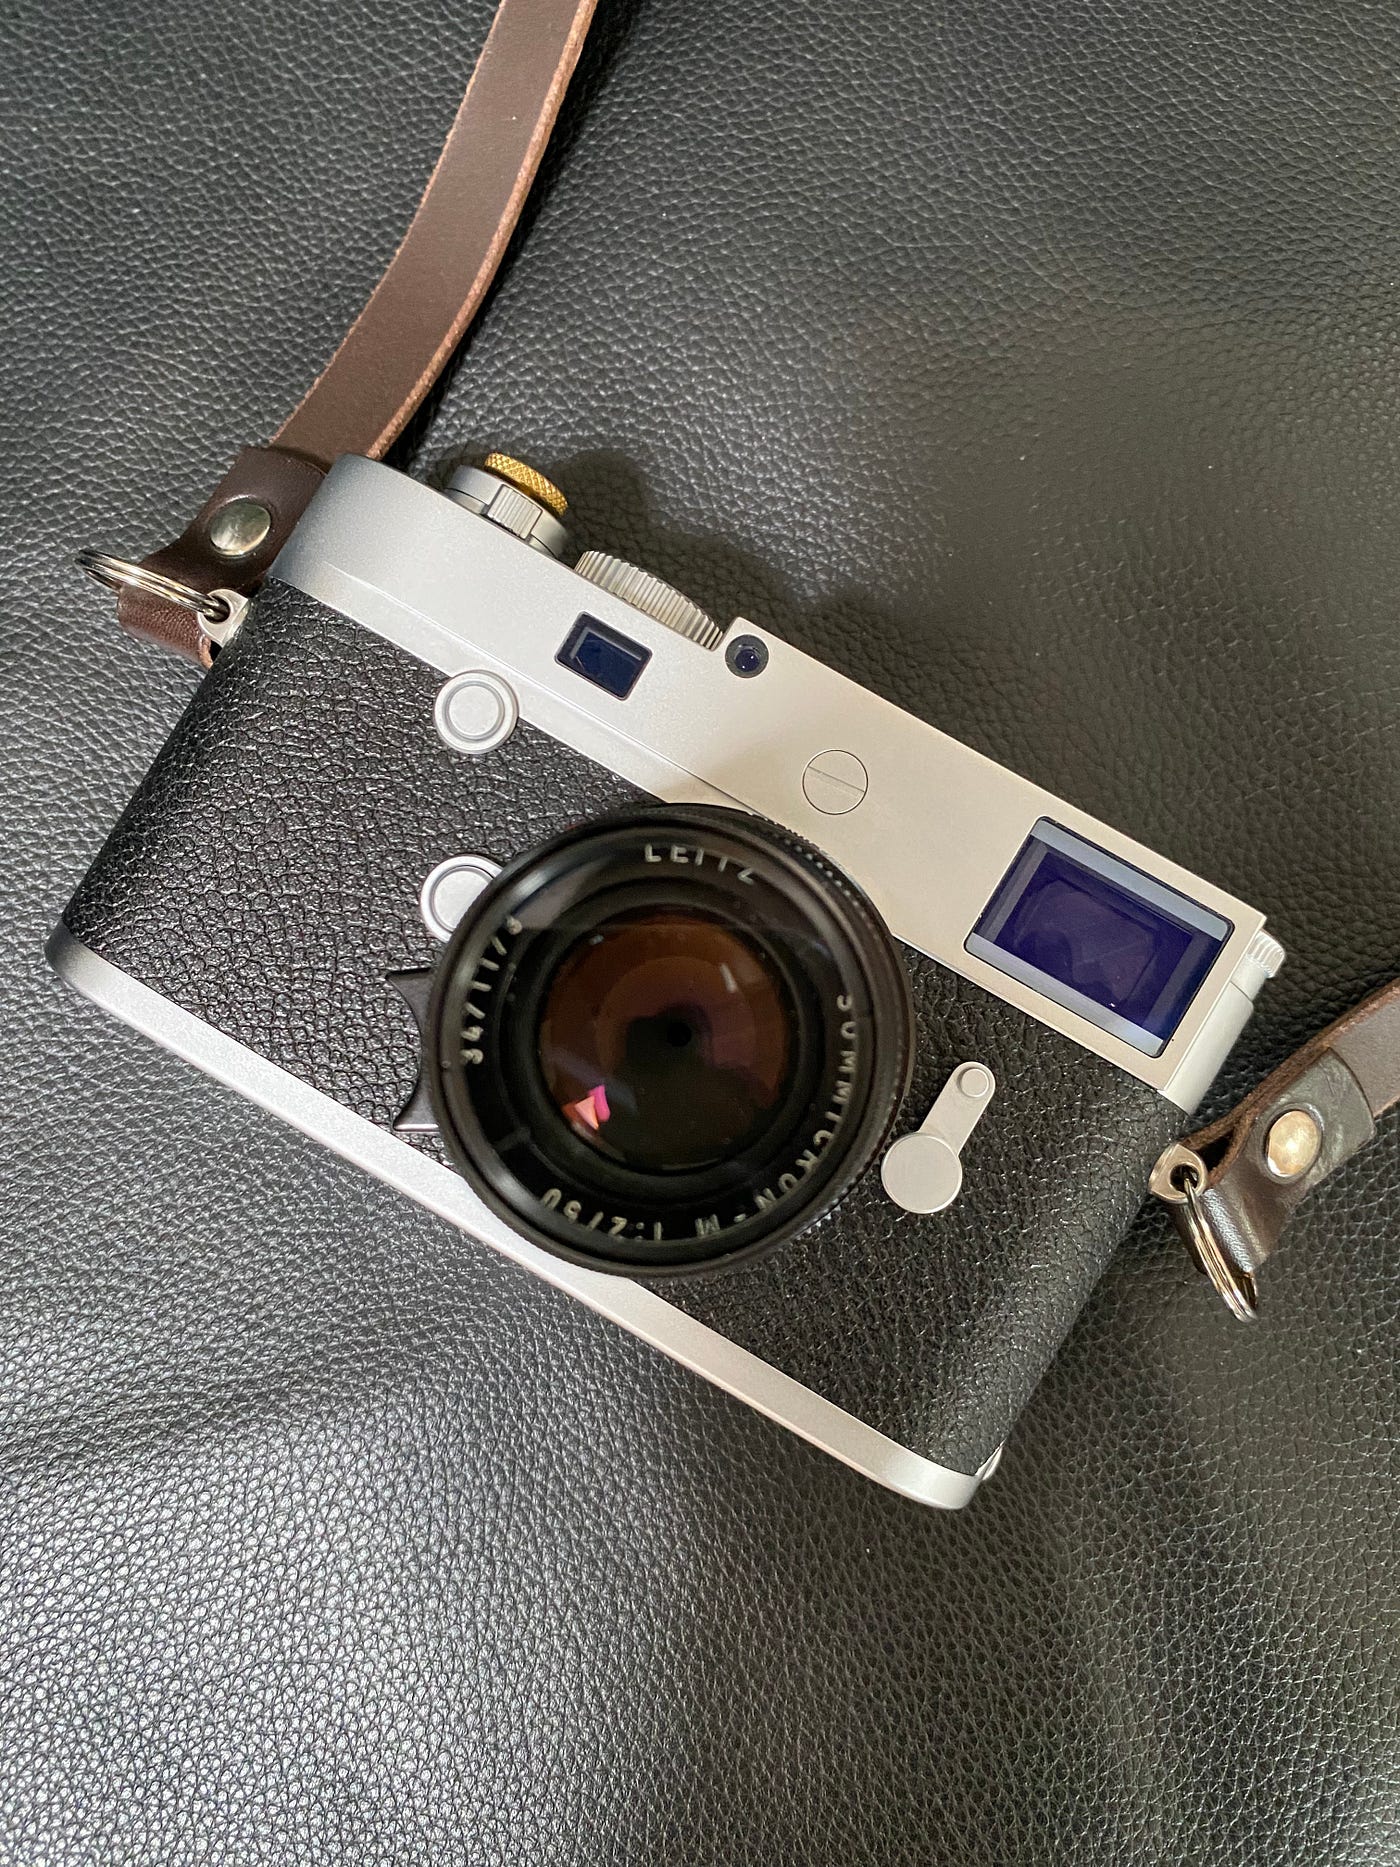 Leica M10-P Review: Leaving Sentimentality Behind with Ambivalence - Tahusa